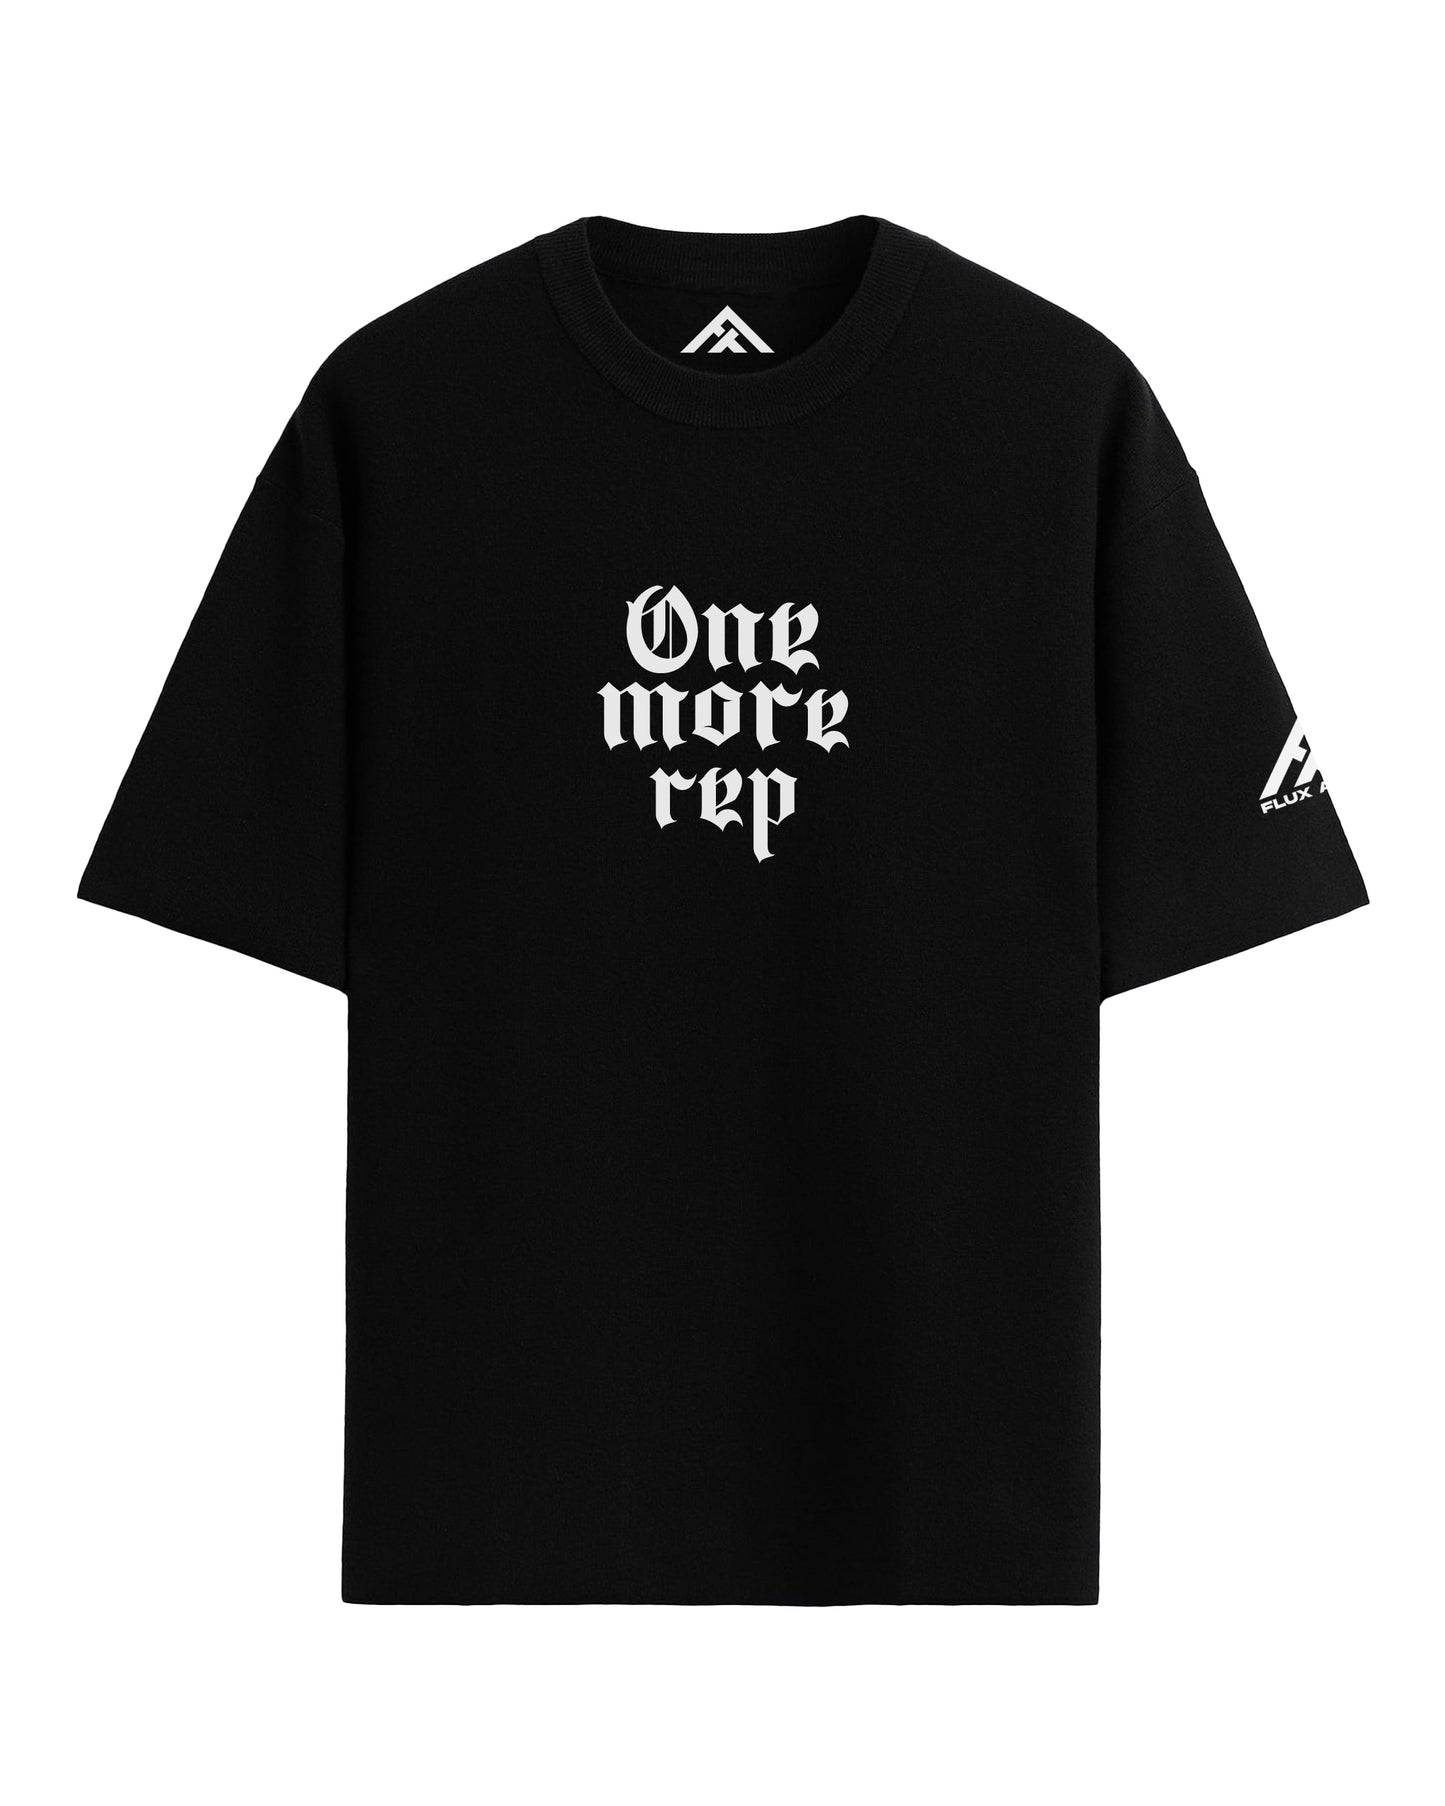 One more Rep Oversized Tshirt